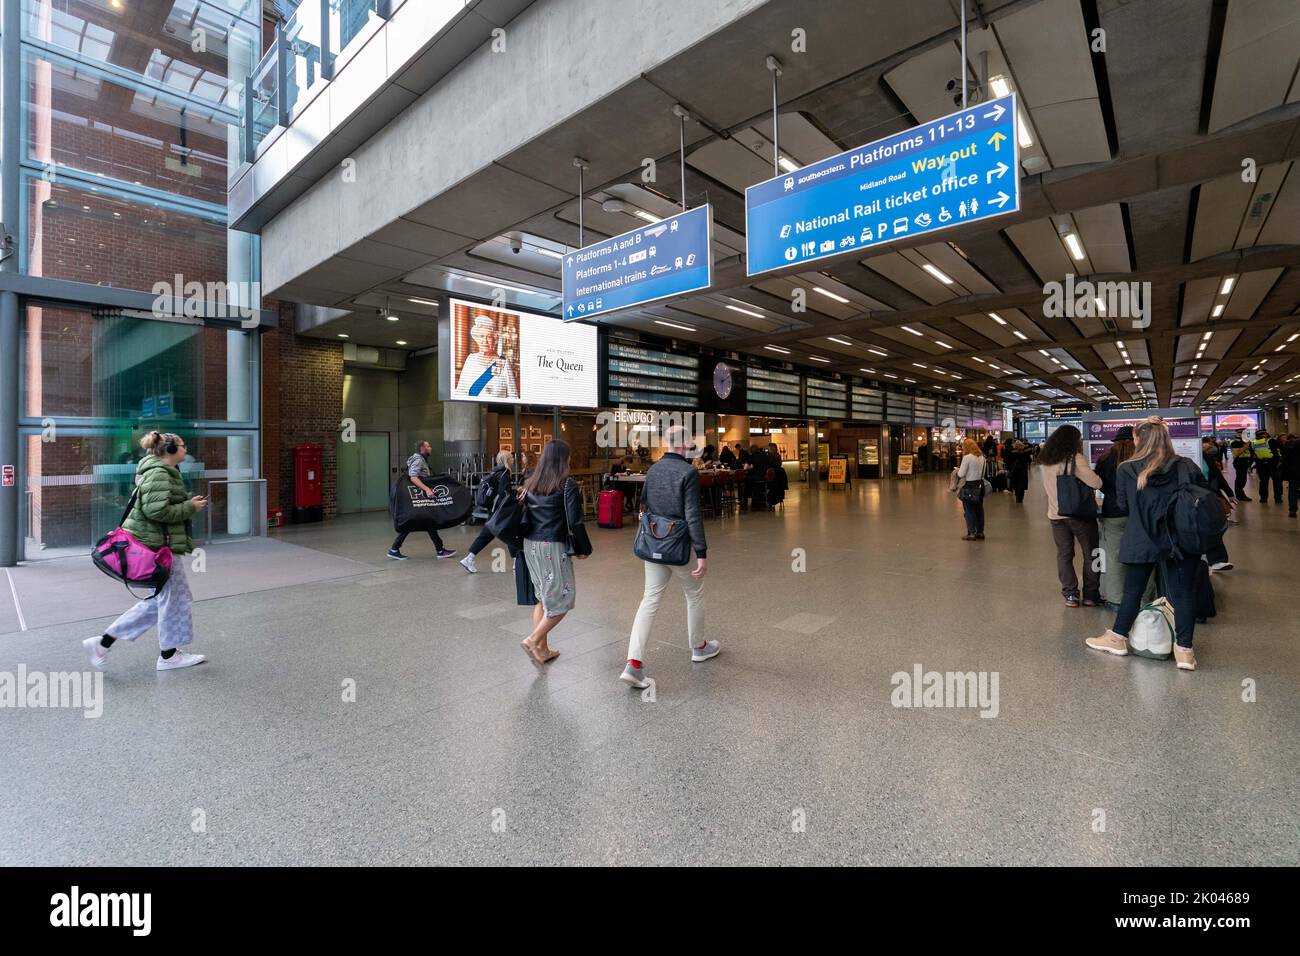 St Pancras Station has a billboard of the Queen Elizabeth 11 after the passing of Her Majesty The Queen, London, United Kingdom, 9th September 2022  (Photo by Richard Washbrooke/News Images) Stock Photo